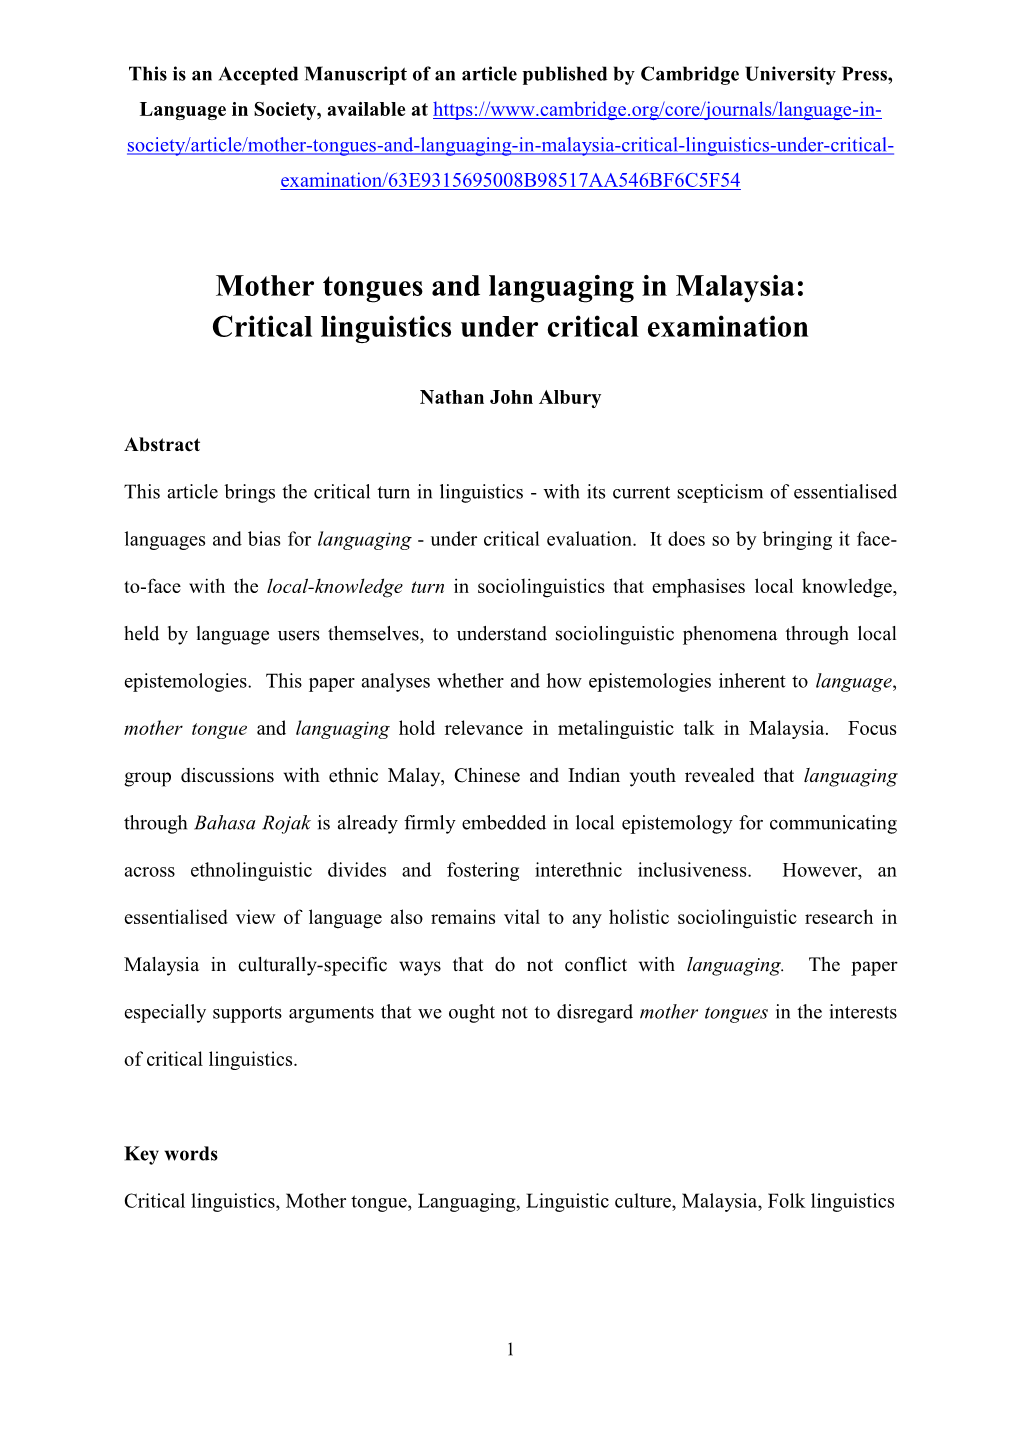 Mother Tongues and Languaging in Malaysia: Critical Linguistics Under Critical Examination